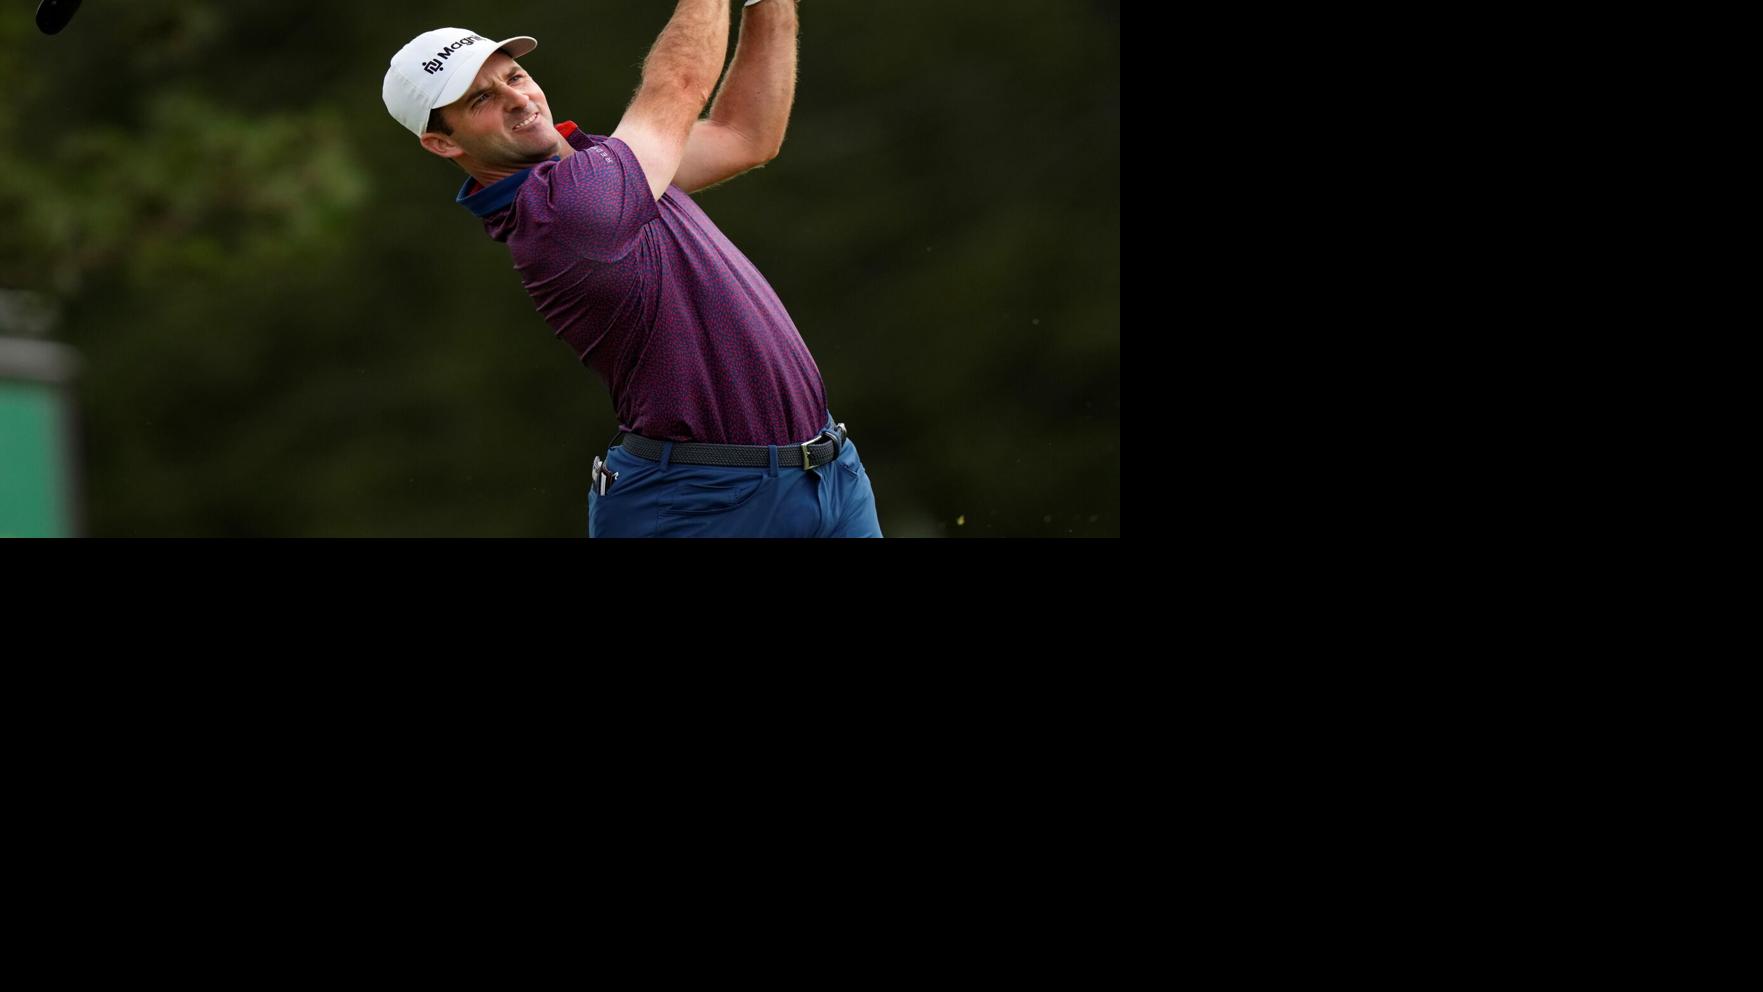 McCarthy shoots 60 to lead Travelers, McIlroy has his first Tour ace